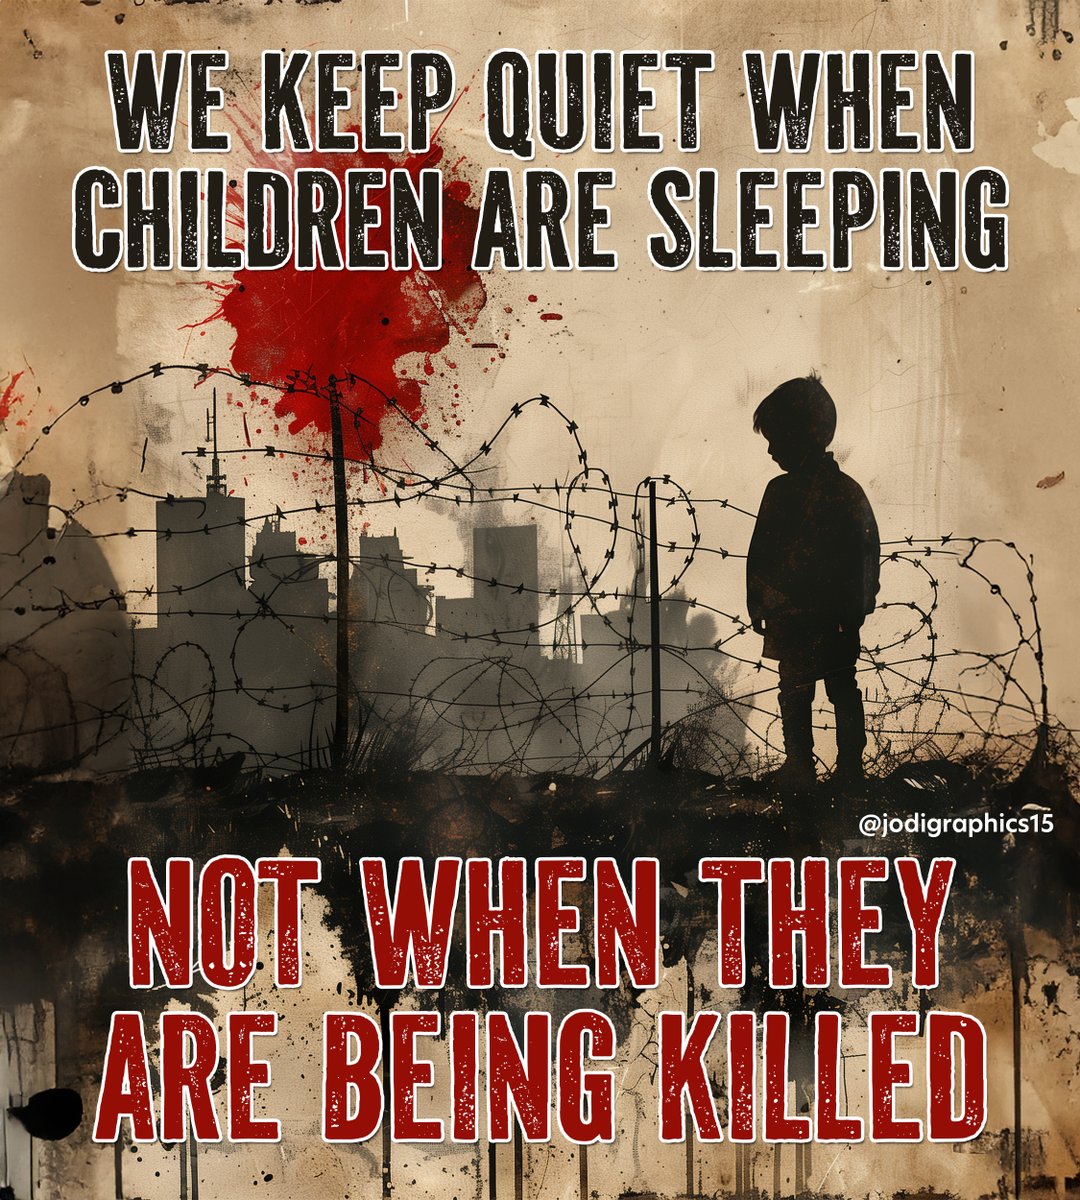 🤫 We keep quiet when children are sleeping, not when they are being killed #EndGenocide #FreePalestine #CeasefireNOW